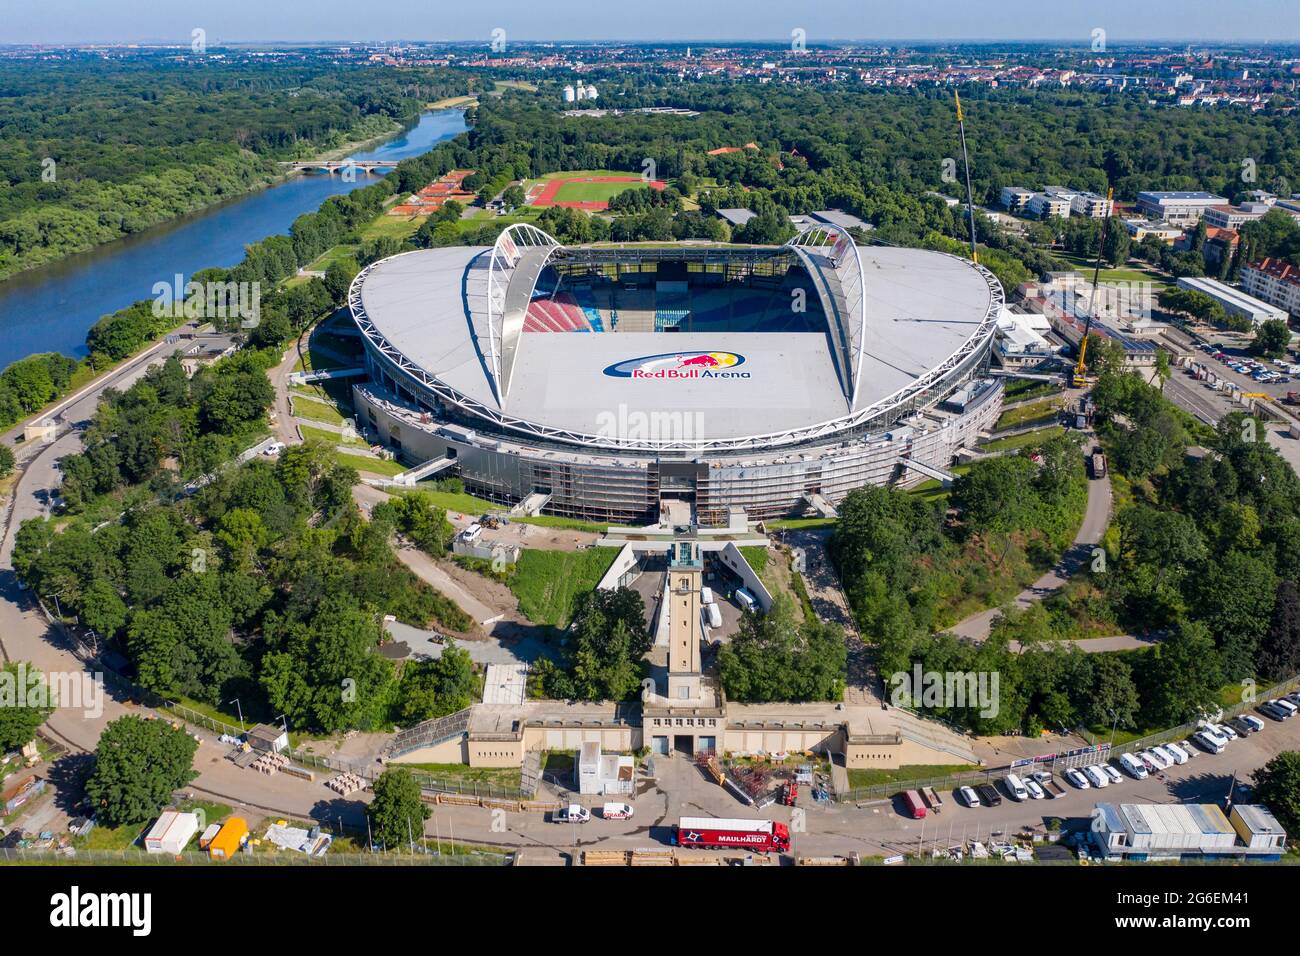 14 June 2021, Saxony, Leipzig: Football: Bundesliga, RB Leipzig. Two cranes and lots of construction vehicles are at the Red Bull Arena. The home ground of the 'Rasenballer' is being rebuilt. The spectator capacity will increase from 42,558 to 47,069 in standing and seated areas. The outside of the stadium is enclosed with a soundproof facade. The embankment of the former Zentralstadion, which encompasses the arena, was cut open behind the historic bell tower to make room for a new entrance. RB Leipzig is investing a good 60 million euros in the conversion by 2022. (Aerial view with drone) Pho Stock Photo